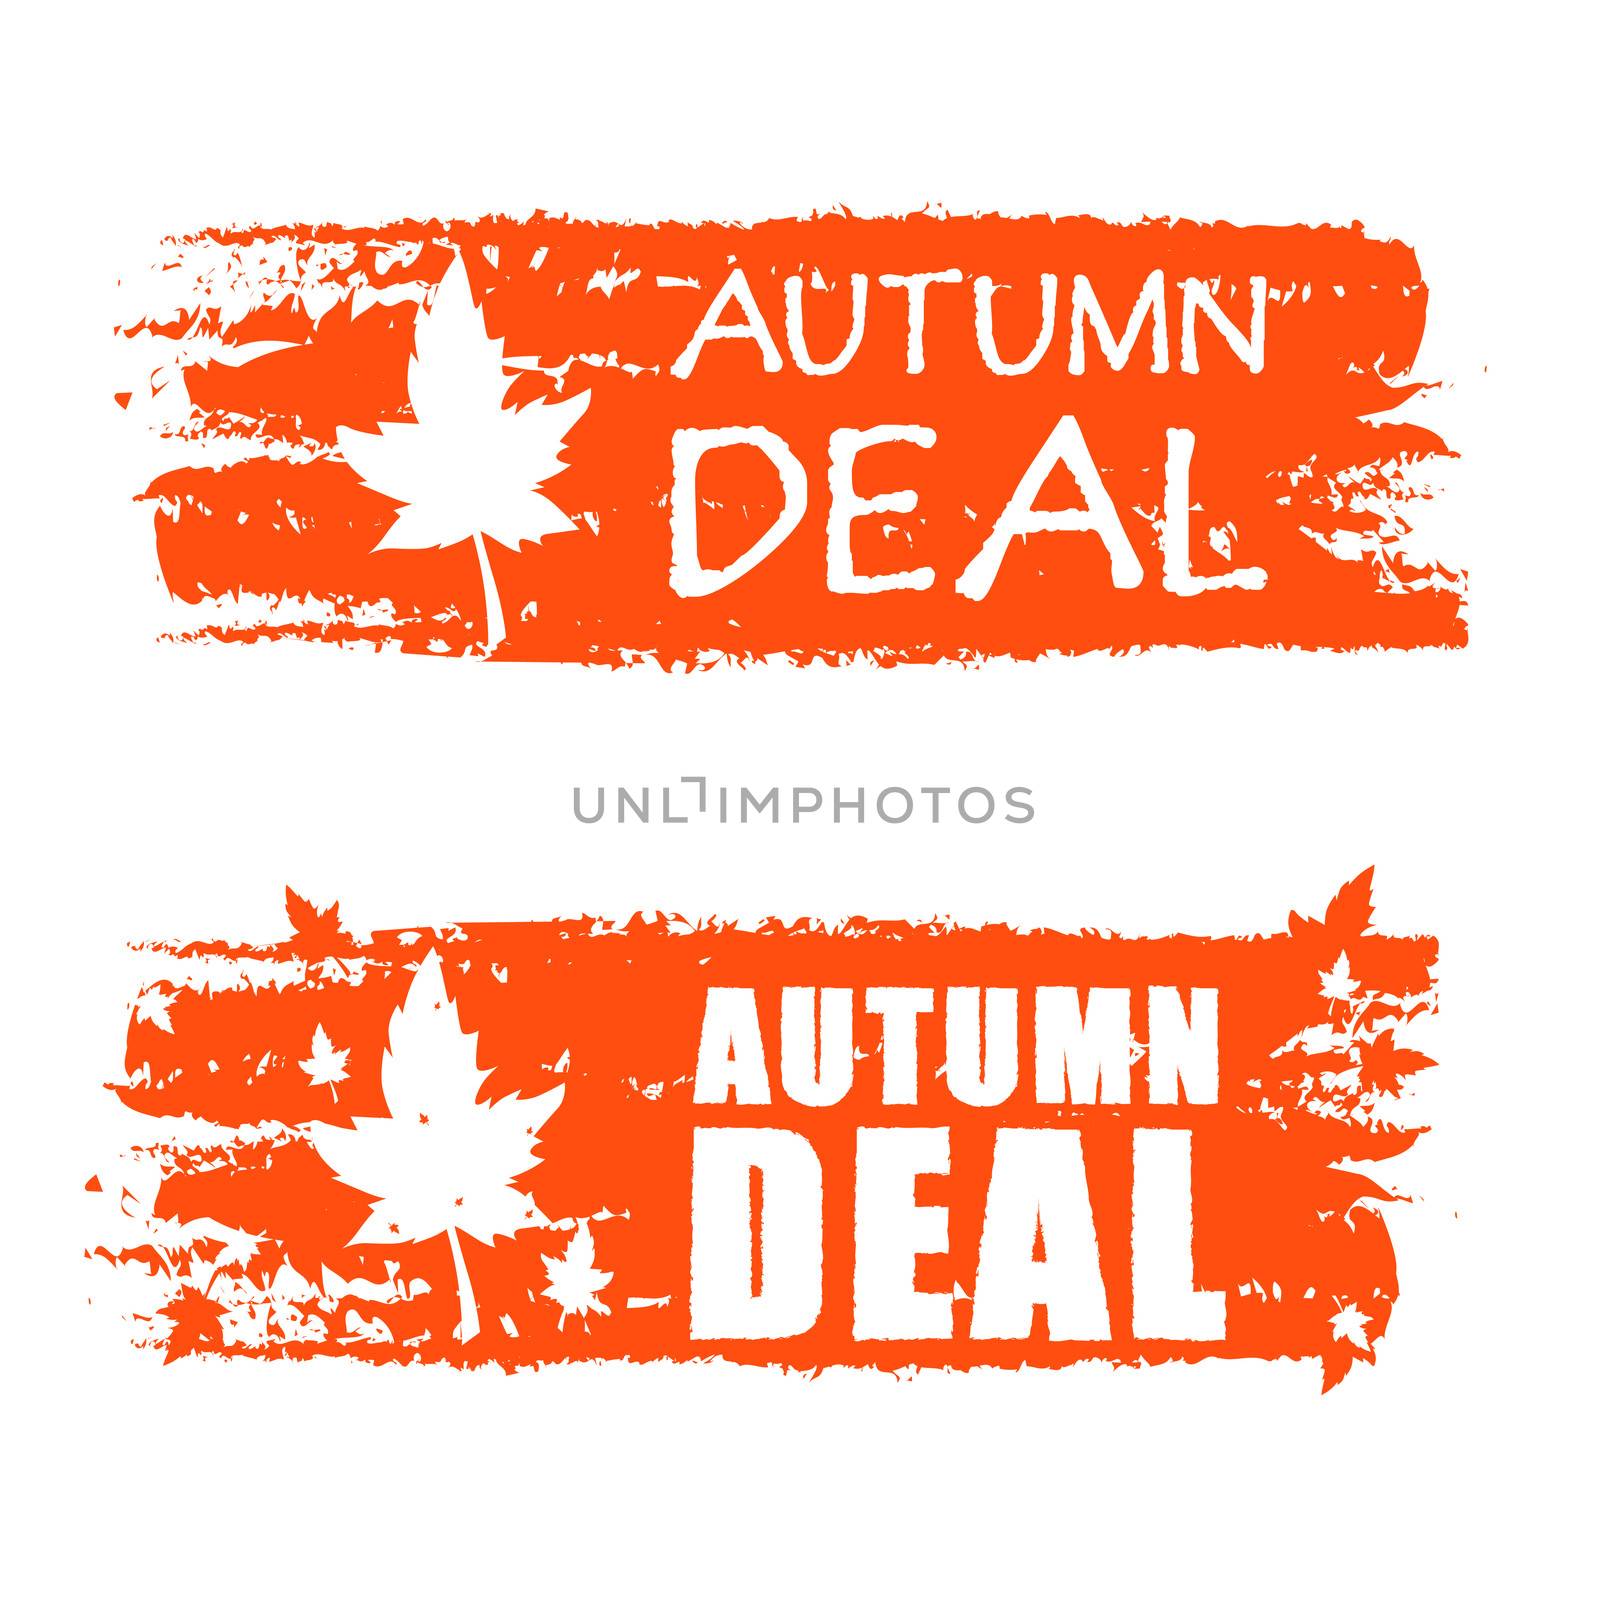 autumn deal - orange drawn banners with text and fall leaf, business concept